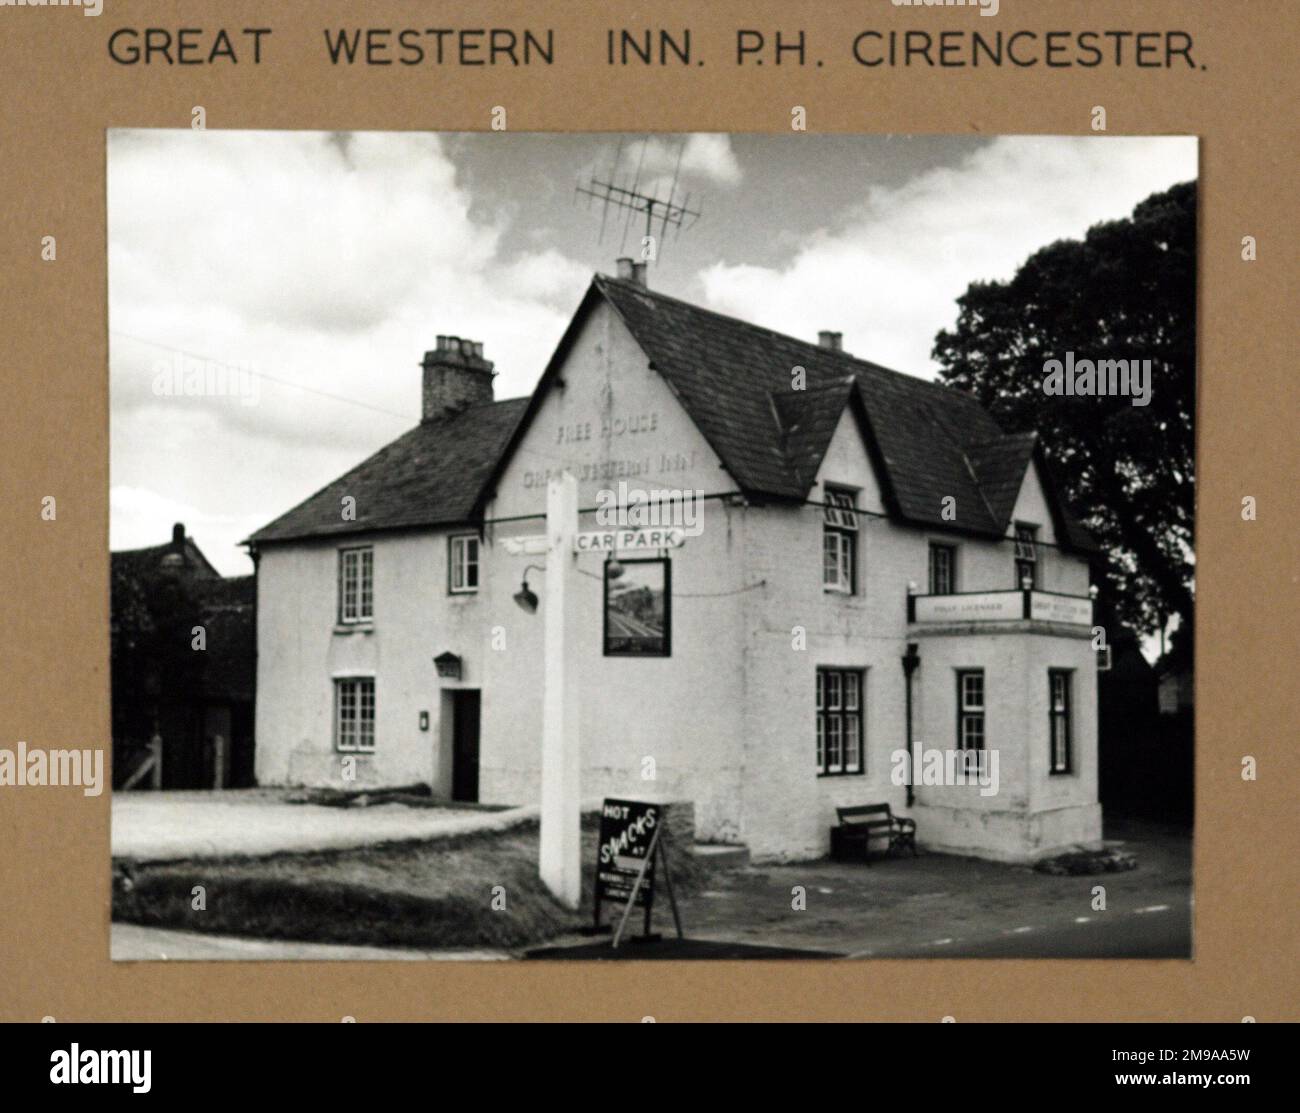 Great Western Inn, Cirencester, Gloucestershire. The main side of the print (shown here) depicts: Corner on view of the pub.  The back of the print (available on request) details: Nothing for the Great Western Inn, Cirencester, Gloucestershire GL7 6NZ . As of July 2018 . Renamed Thames Head Inn . Arkells Stock Photo